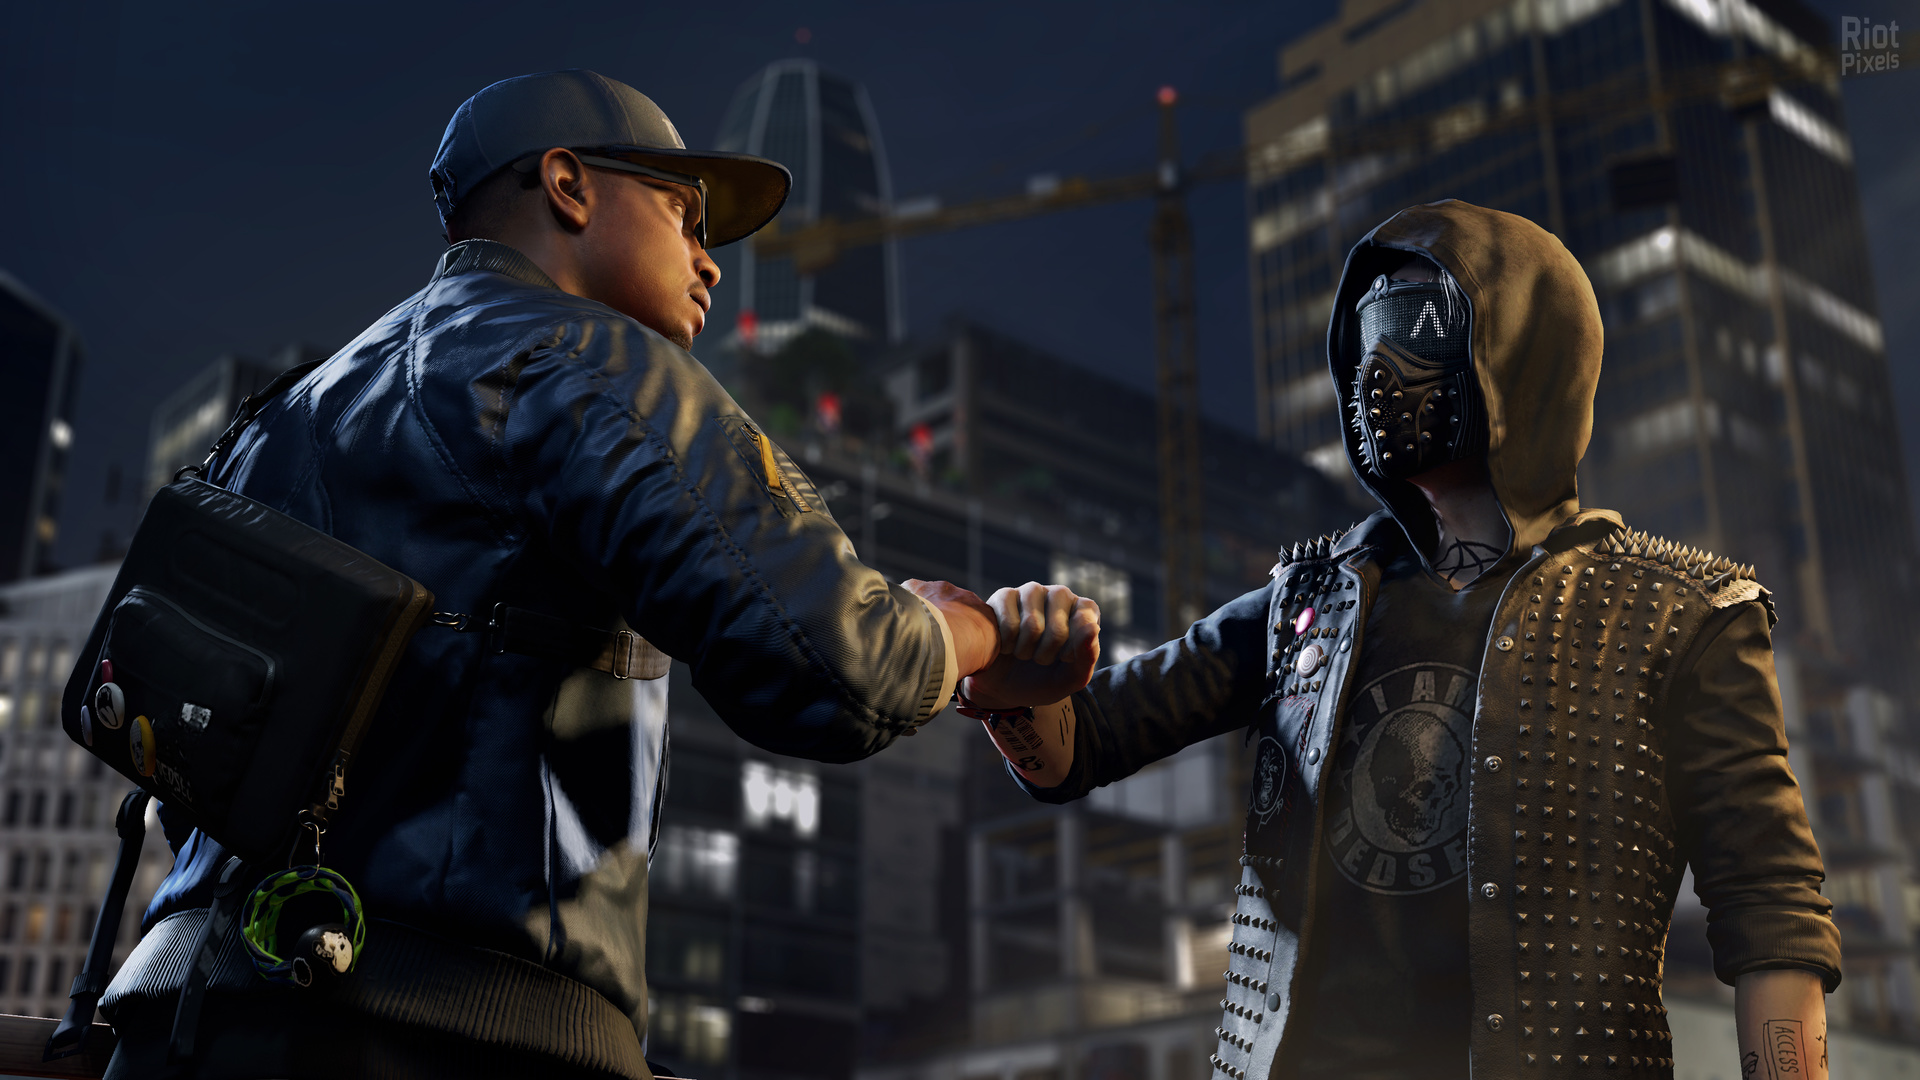 Watch Dogs 2: Gold Edition